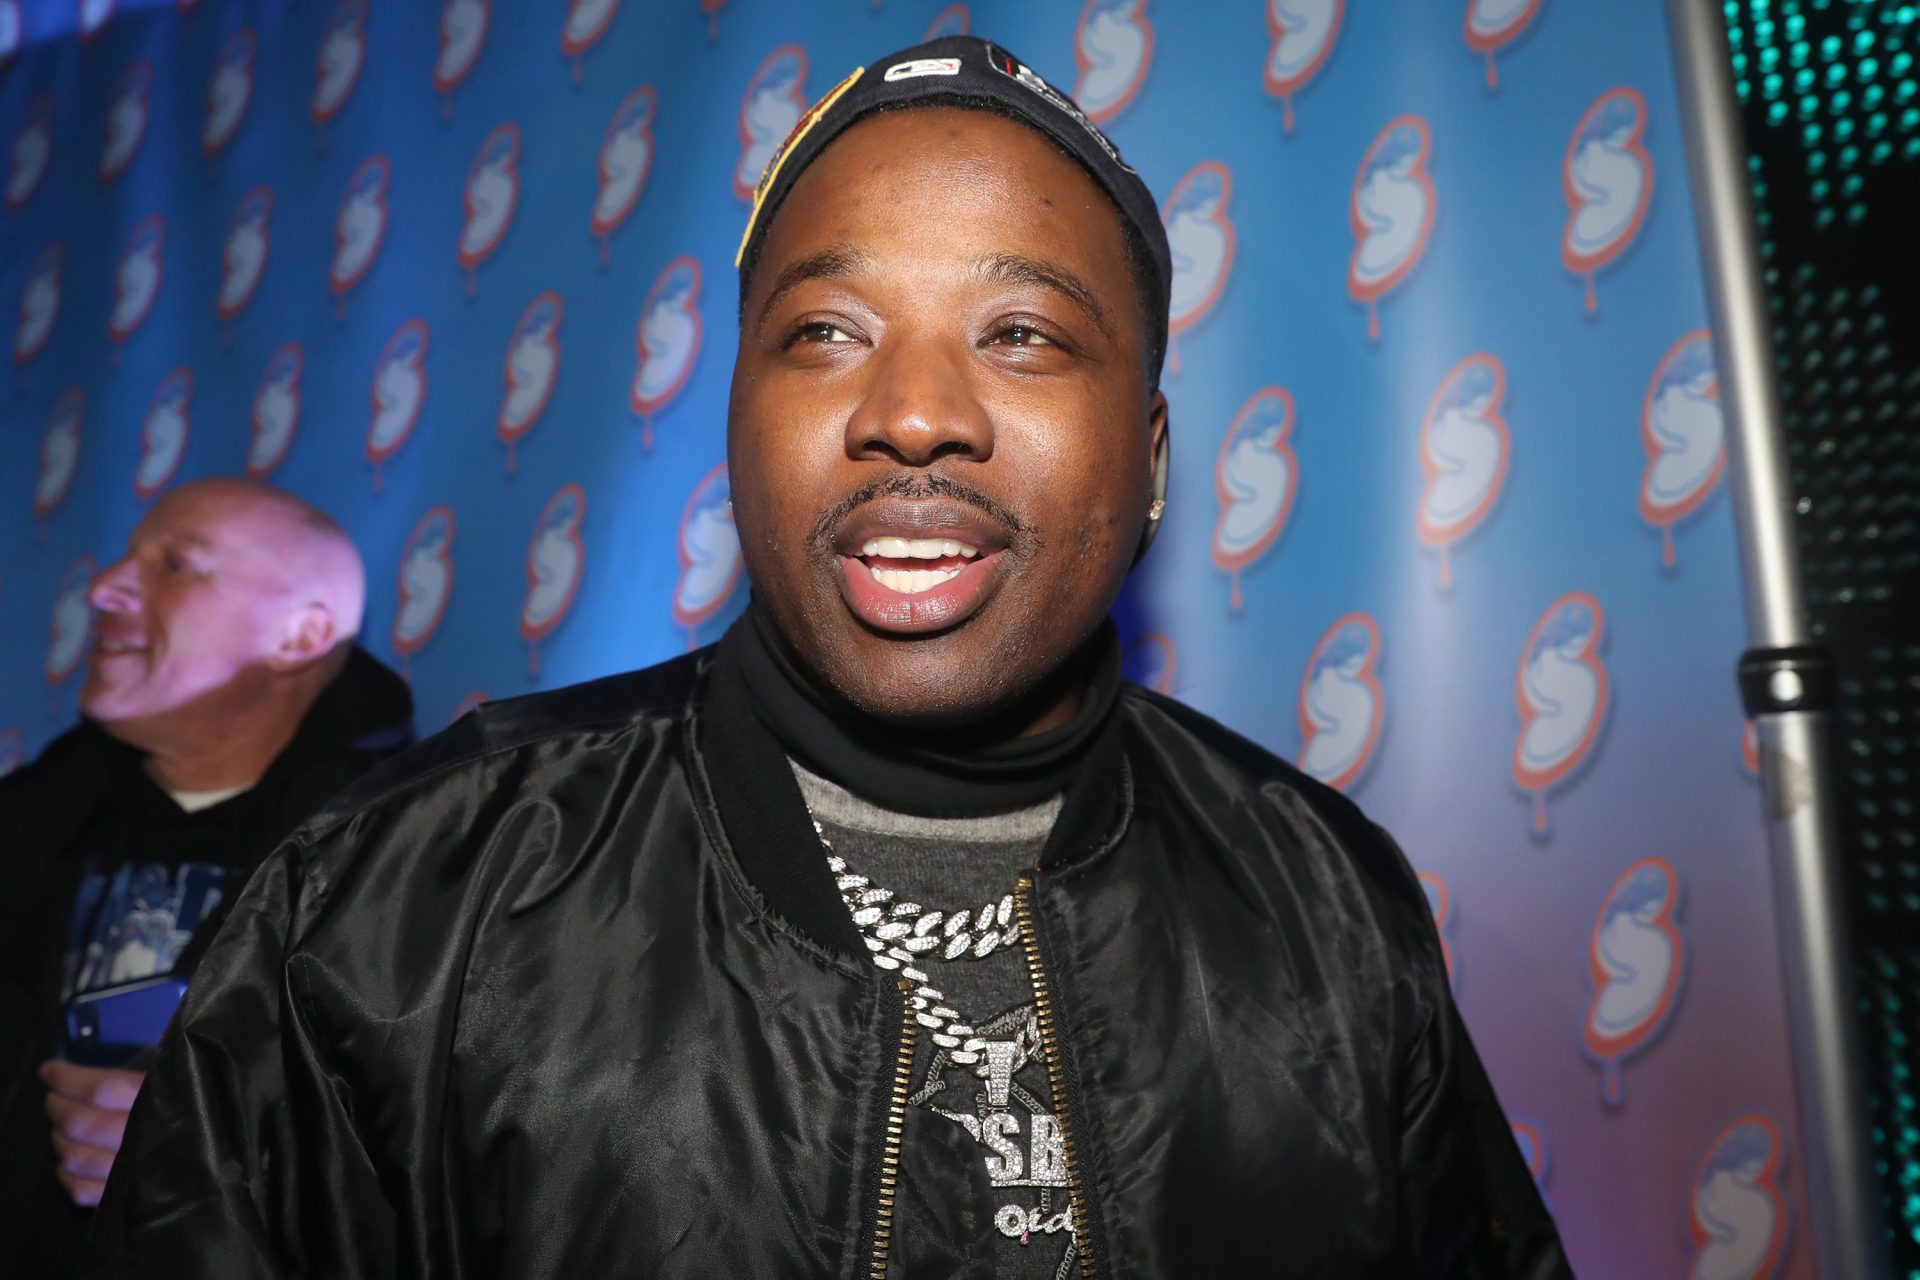 Troy Ave Testifies There Was A Struggle Over Gun With Taxstone In Fatal Shooting